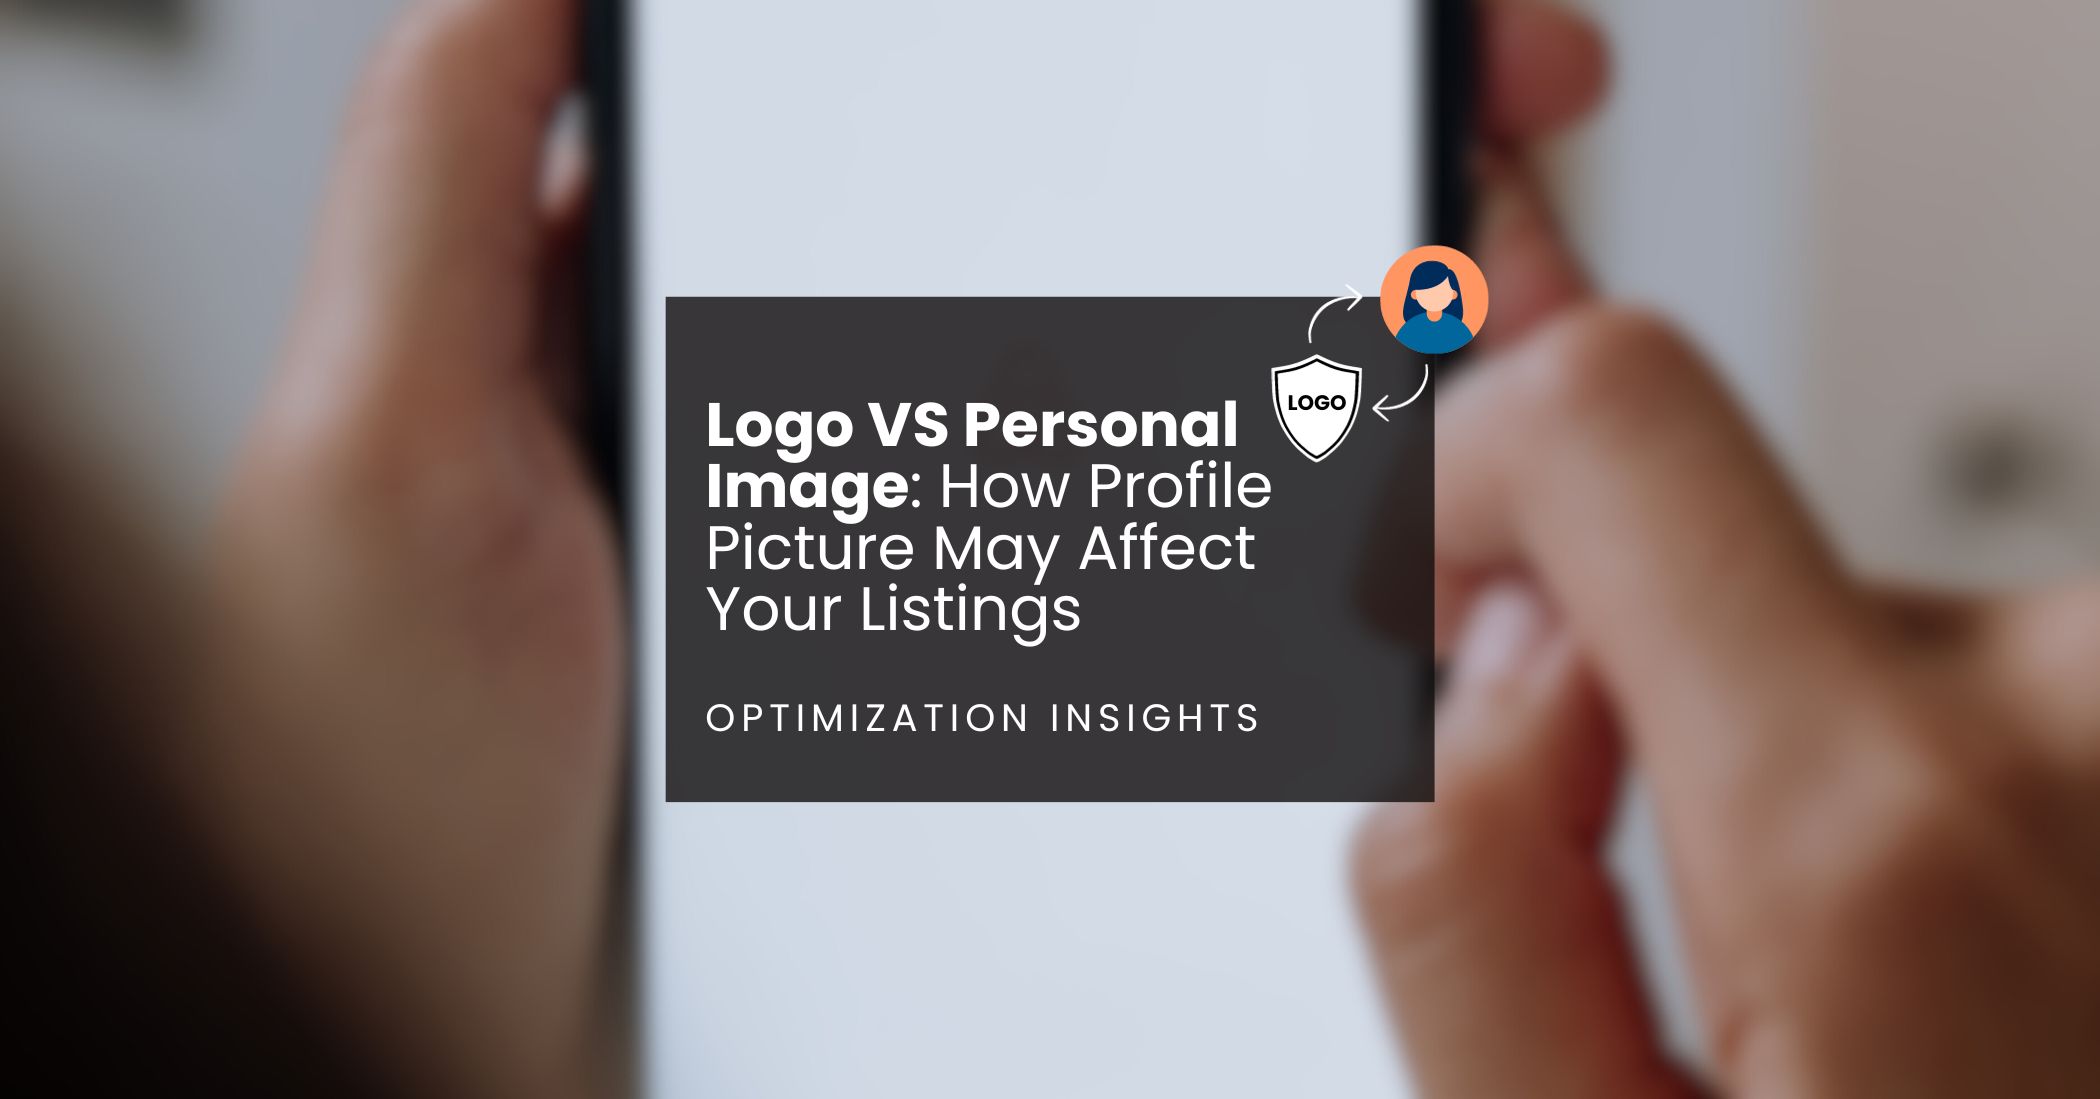 Logo VS Personal Image: How Profile Picture May Affect Your Listings